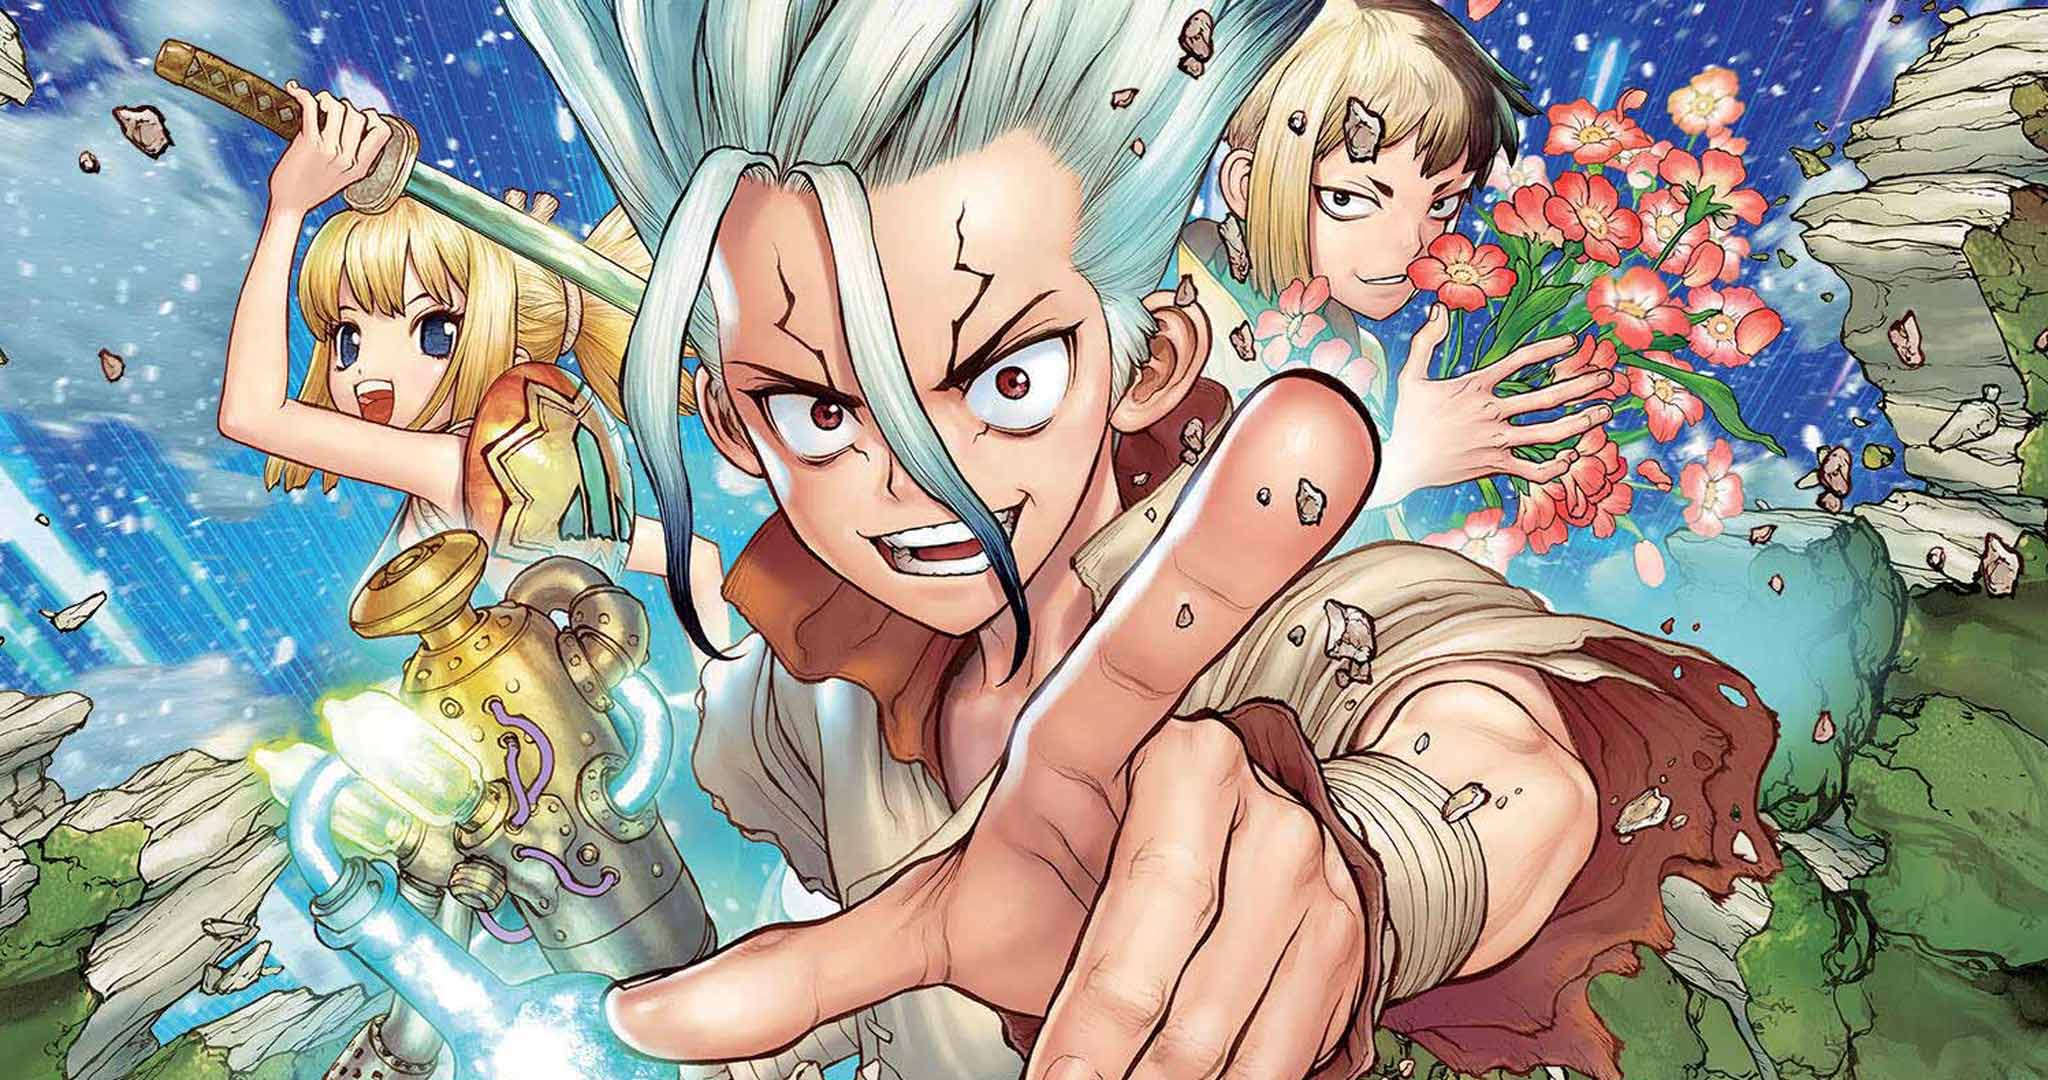 Dr. Stone' Episode 24 Release Date and Spoilers: What We